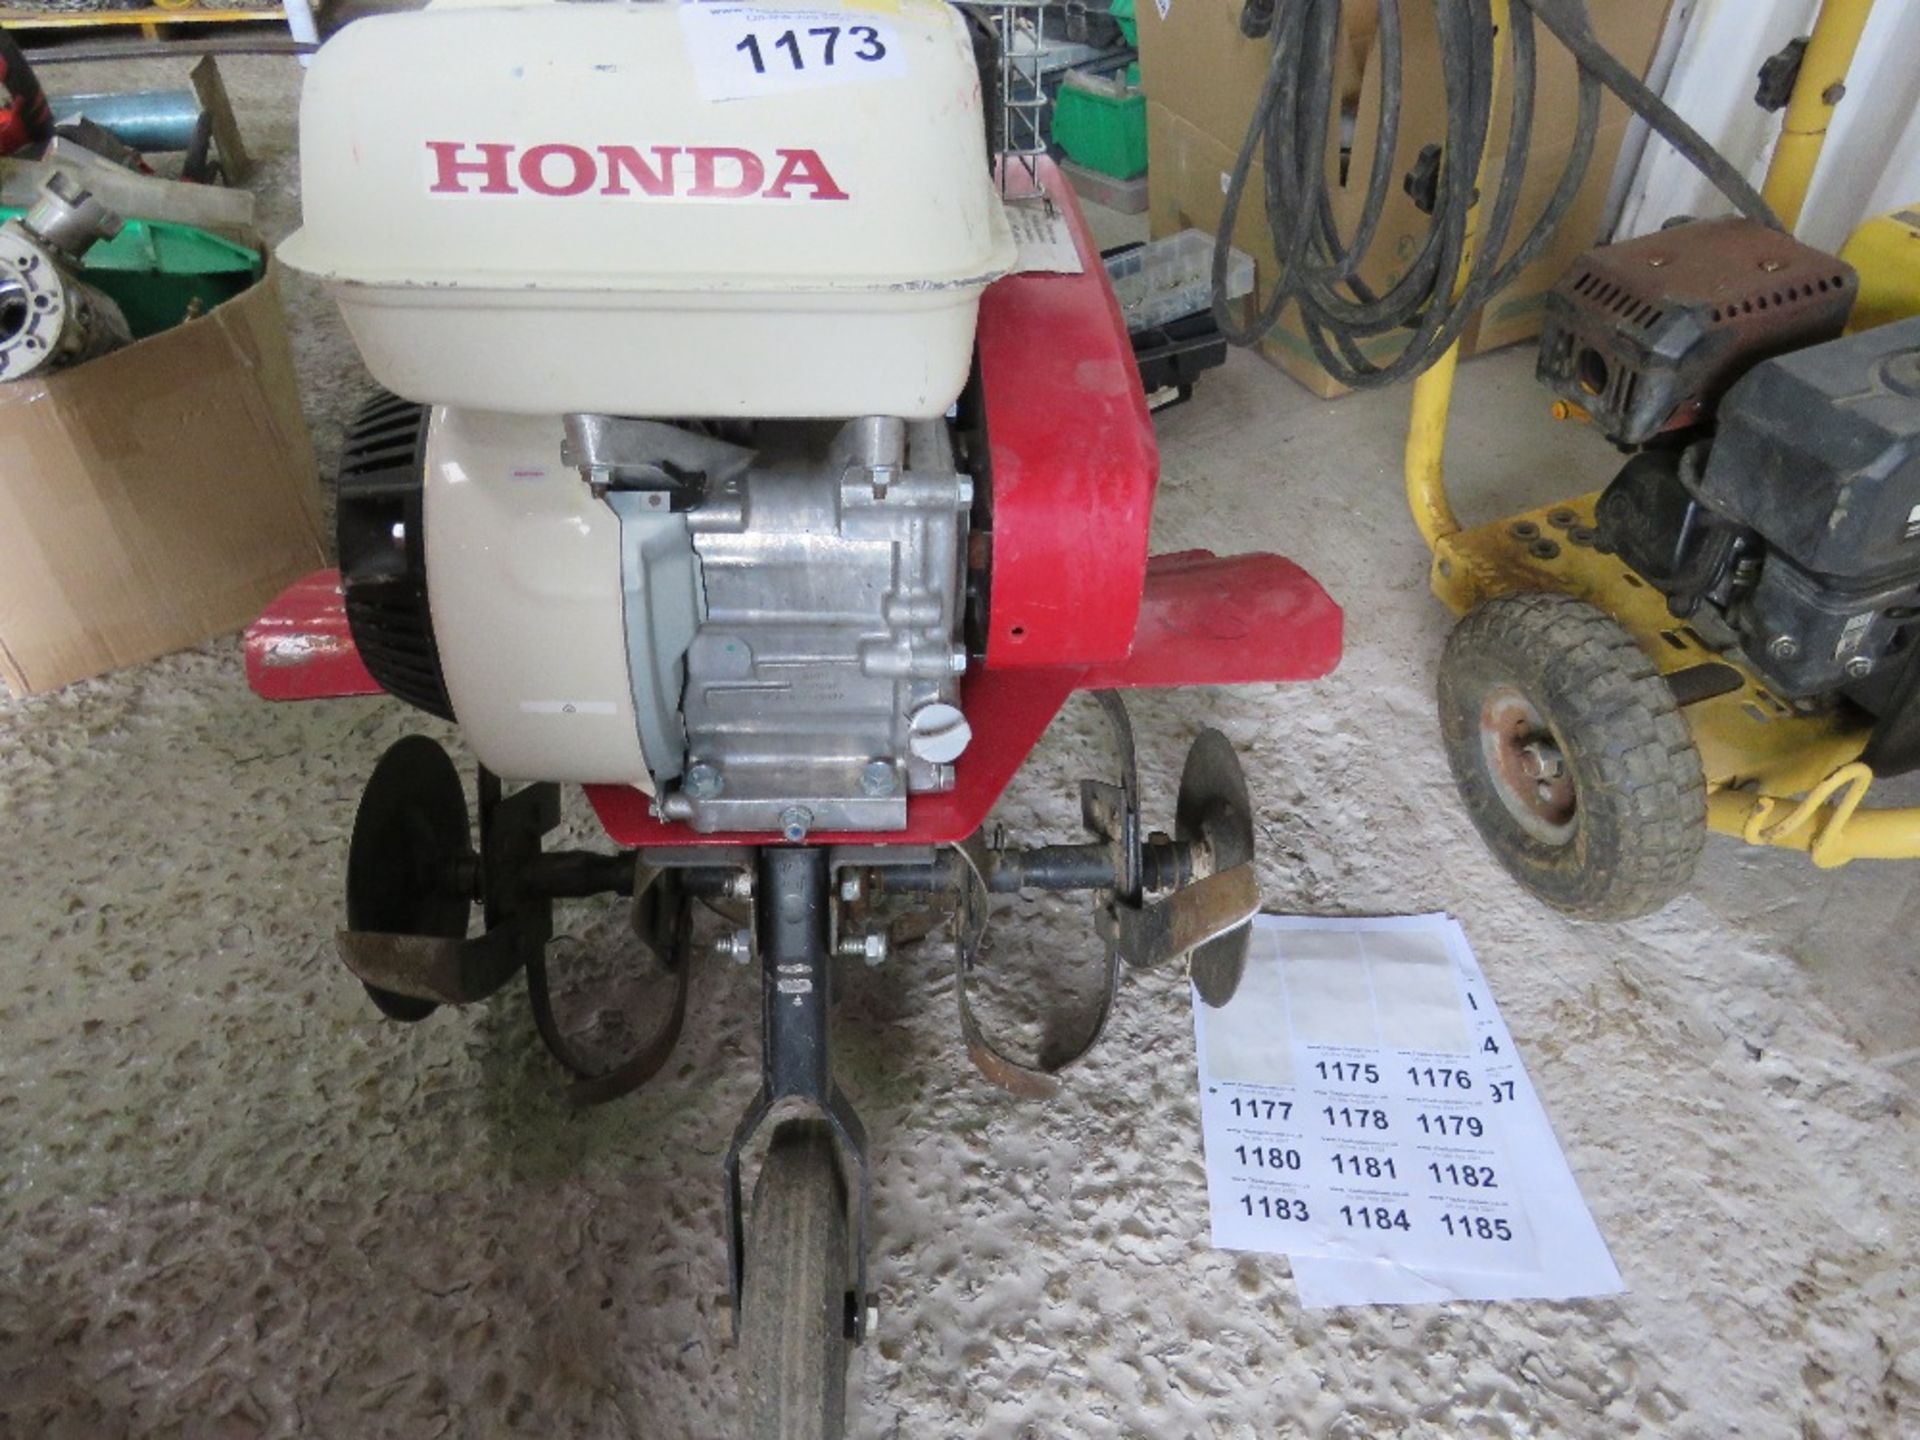 HONDA FG320 PETROL ROTORVATOR, RUNS BUT BLADES NOT TURNING?? THIS LOT IS SOLD UNDER THE AUCTIONEERS